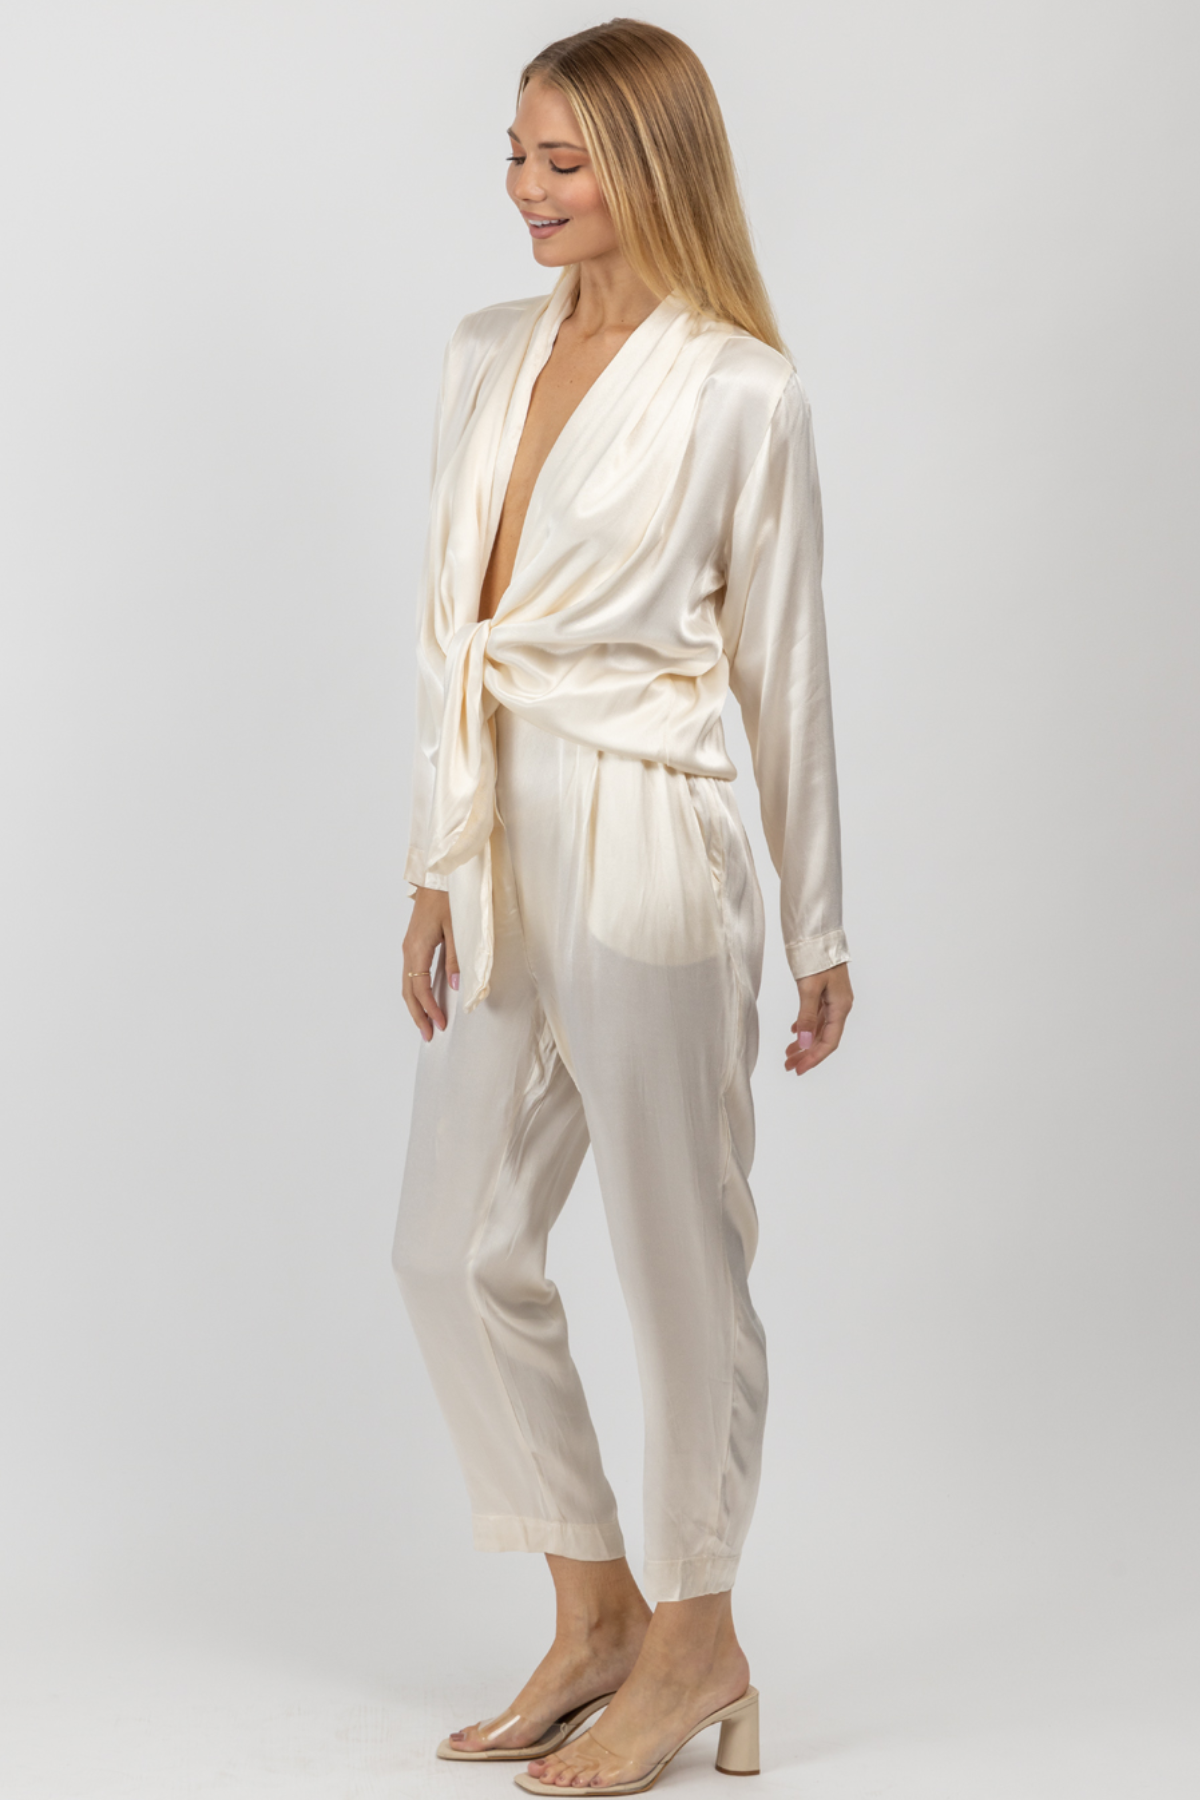 Ayelin Jumpsuit - Linen Look Relaxed 3/4 Sleeve Jumpsuit in Cream